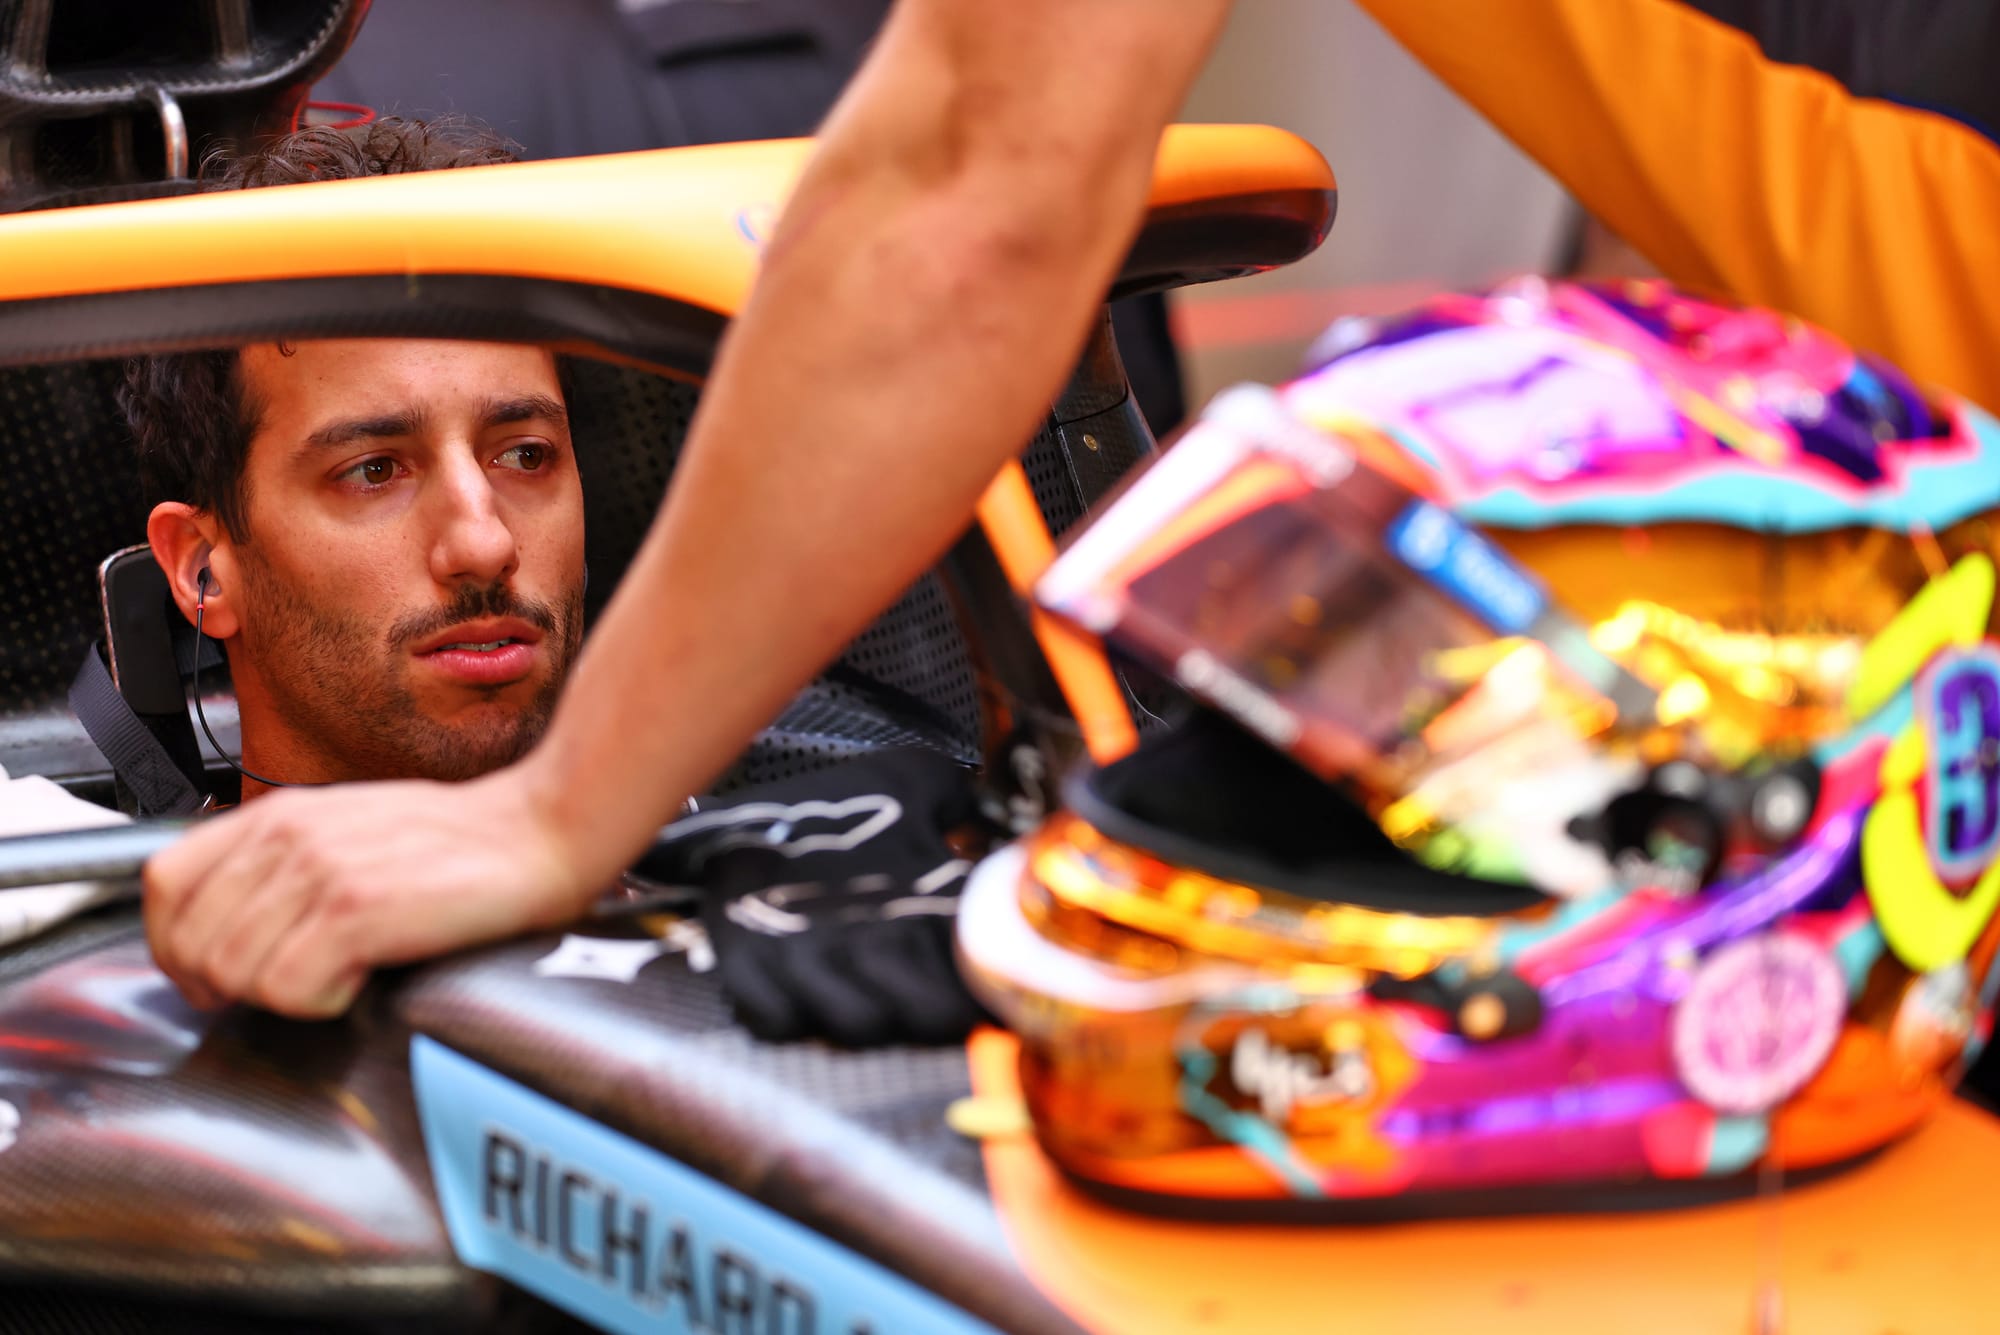 Ricciardo reborn - what fearing his F1 career was over changed - The Race